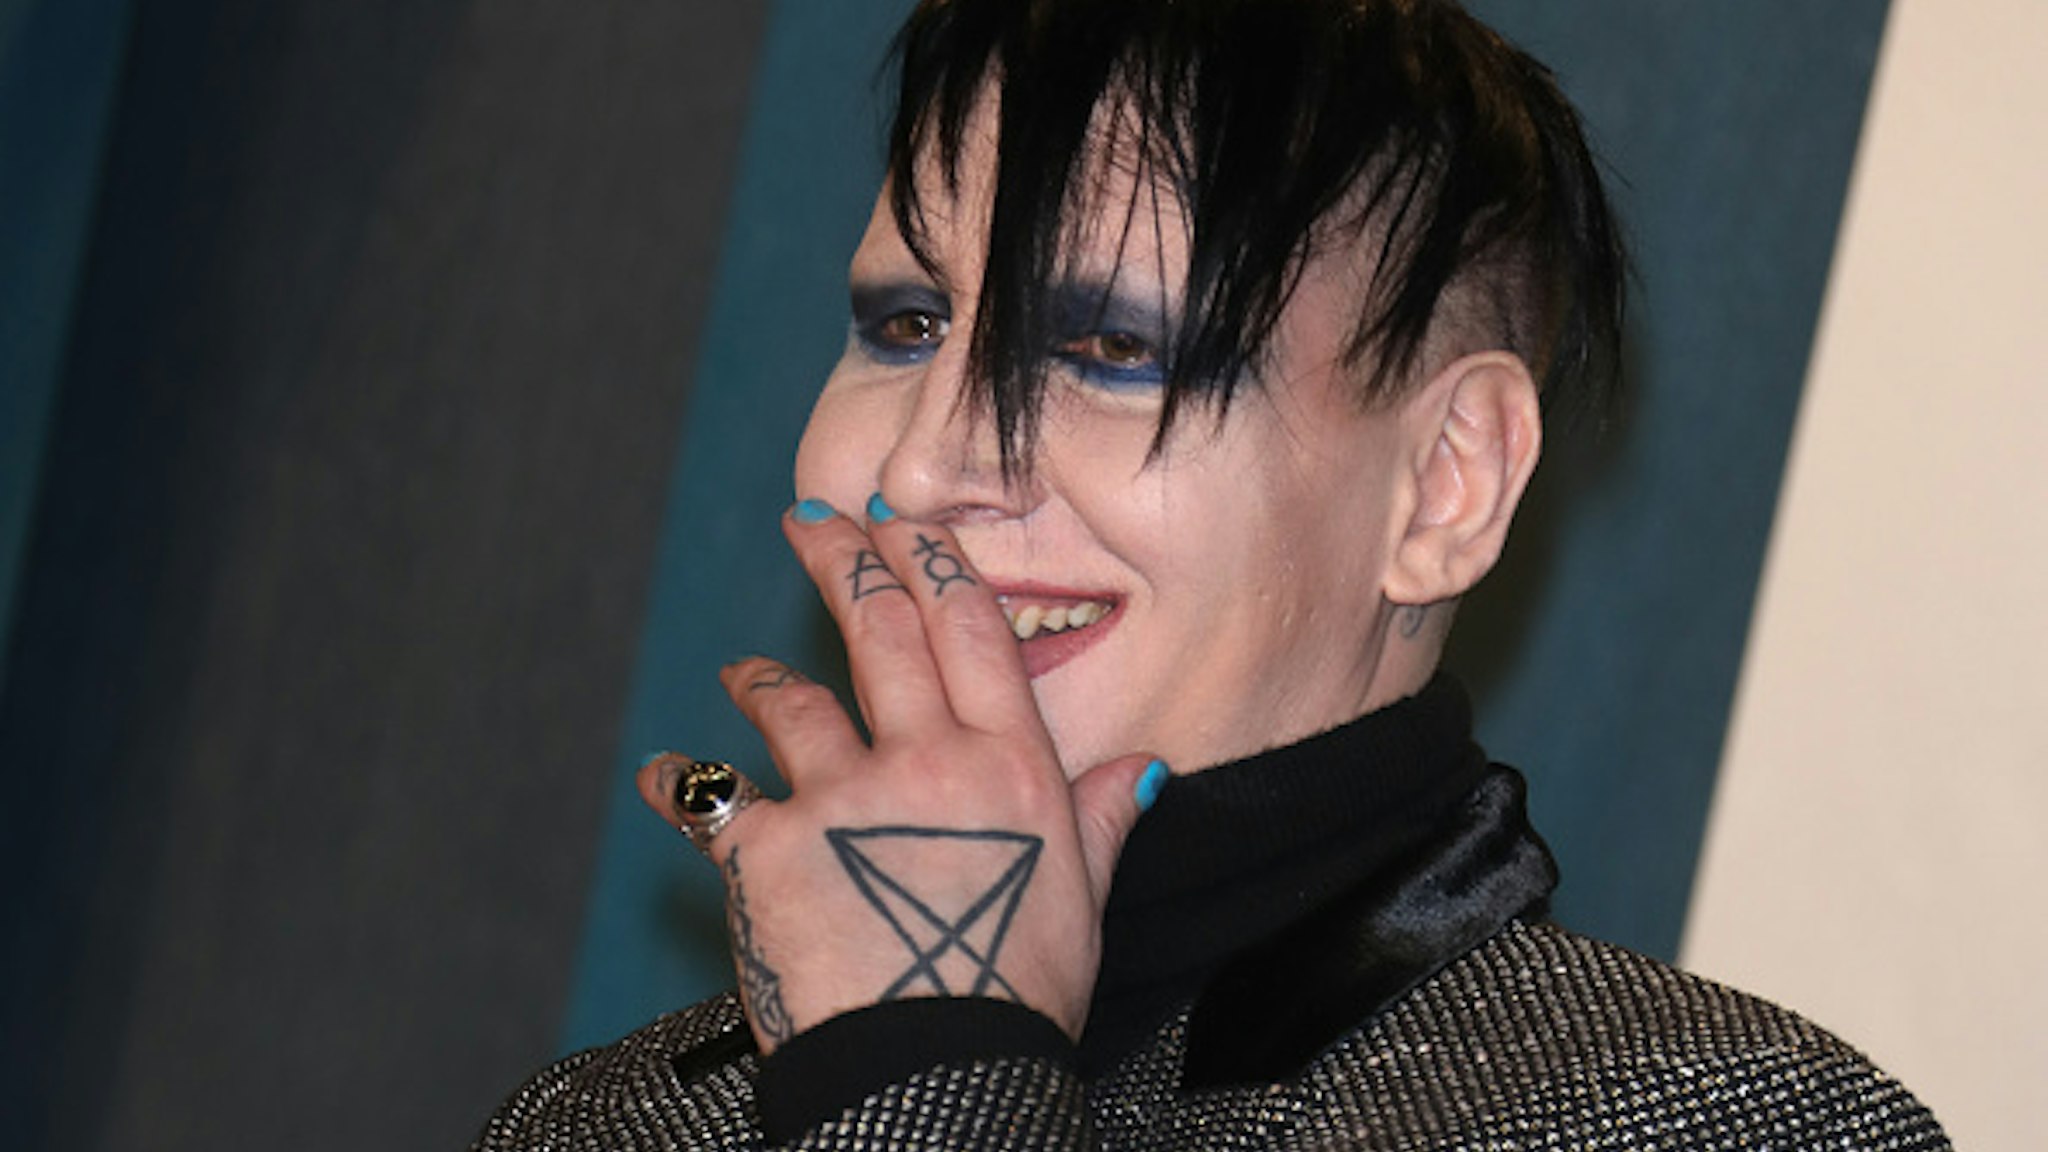 BEVERLY HILLS, CALIFORNIA - FEBRUARY 09: Marilyn Manson attends the 2020 Vanity Fair Oscar Party at Wallis Annenberg Center for the Performing Arts on February 09, 2020 in Beverly Hills, California.